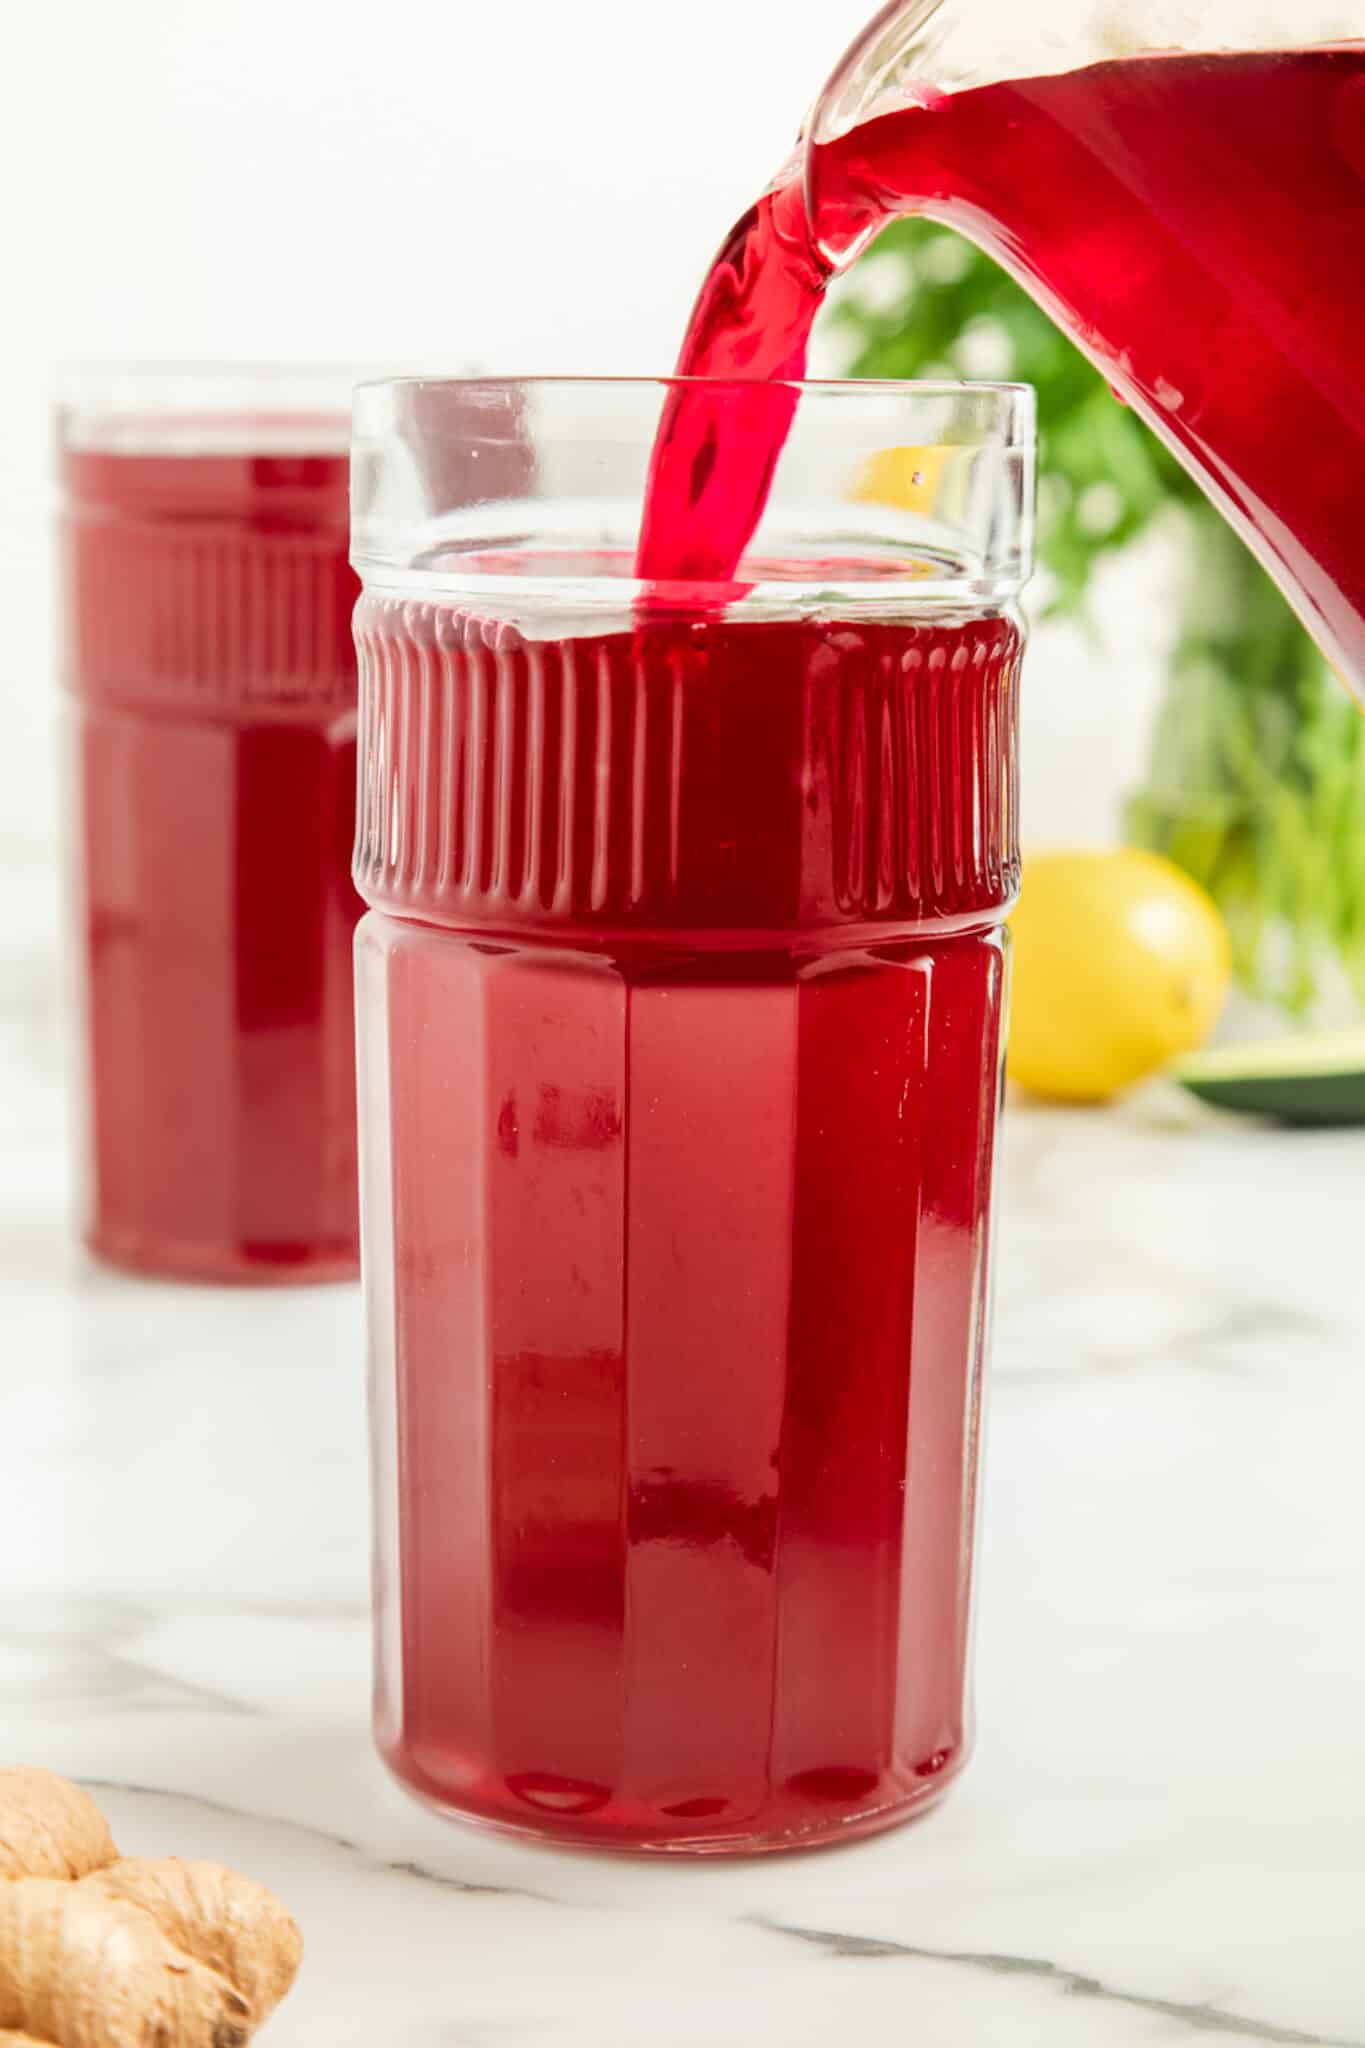 pouring homemade beet juice into a glass.